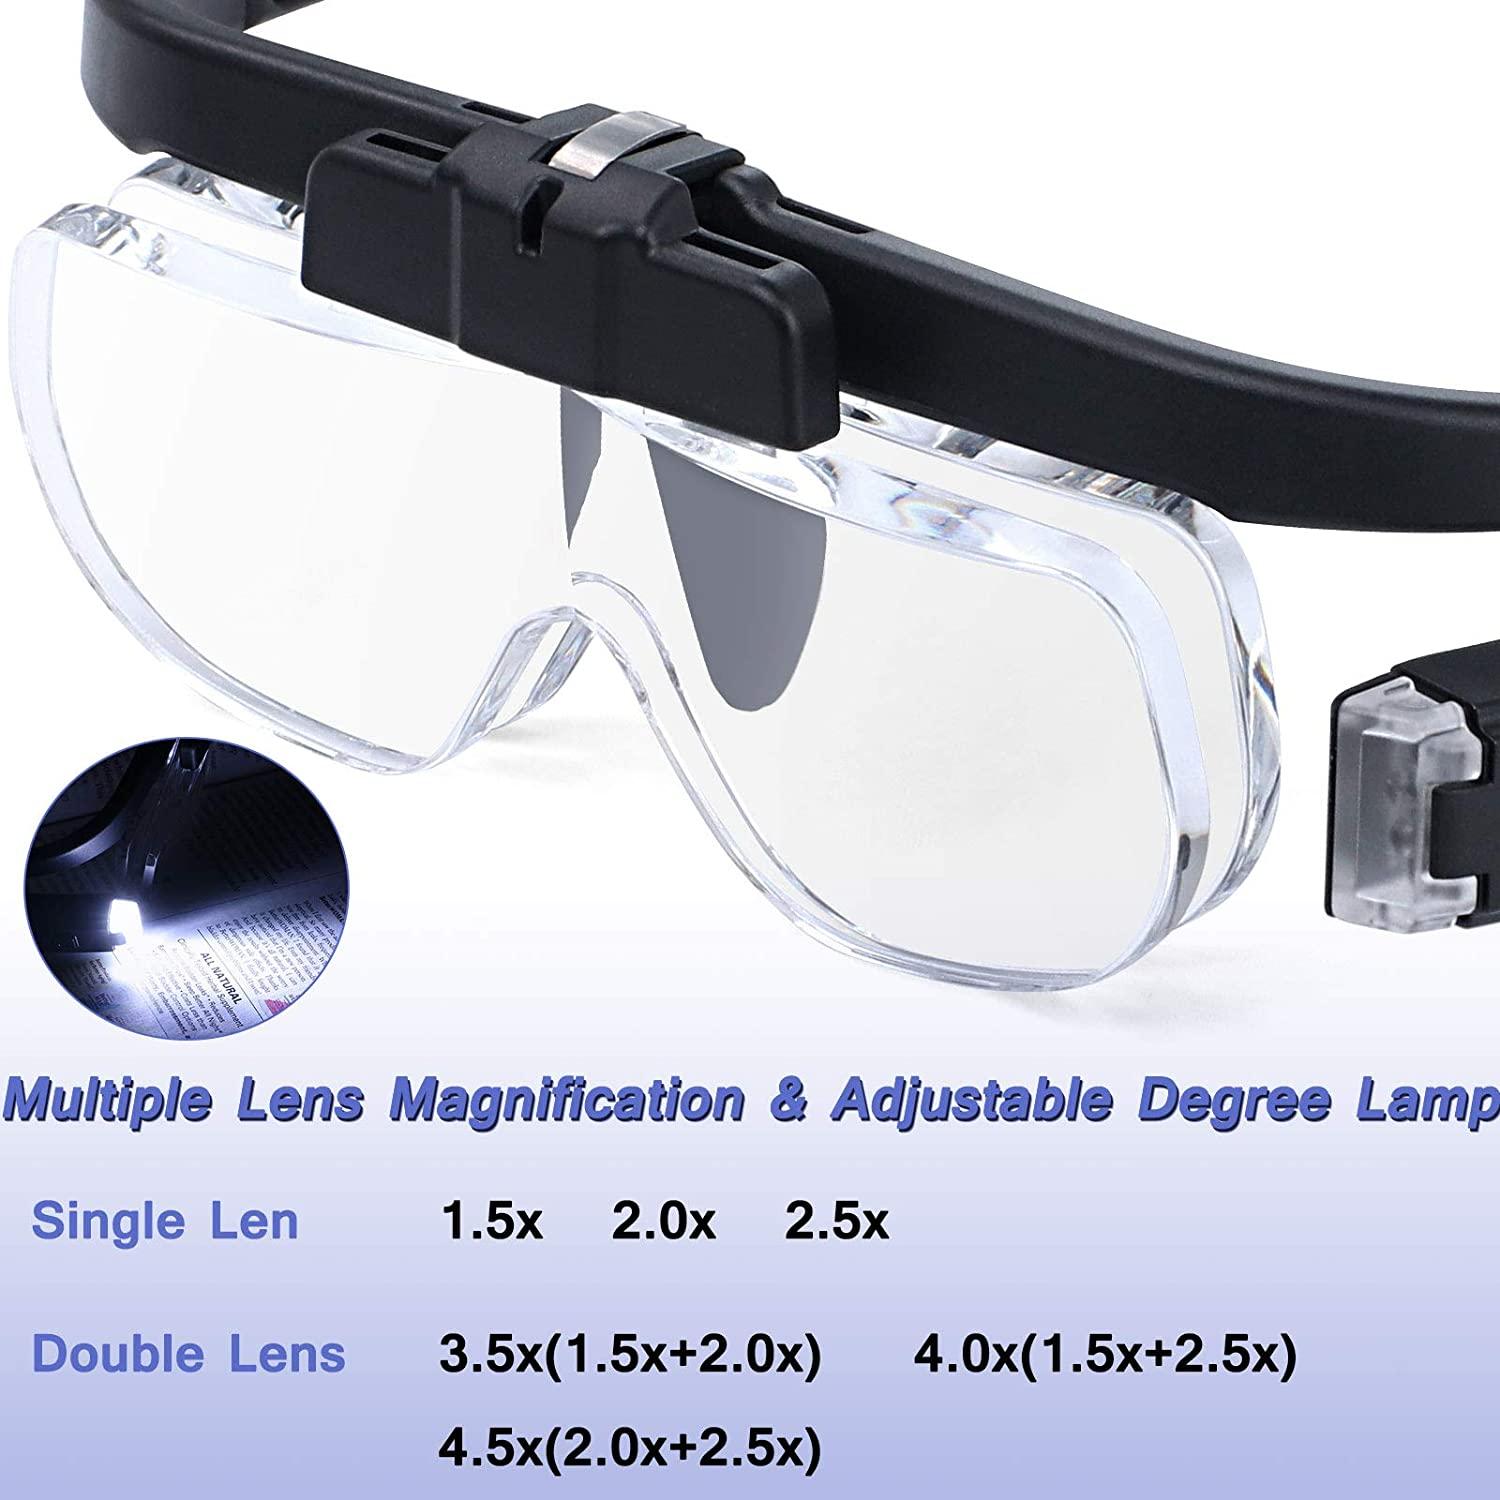 Head Magnifier Glasses 1.5X 2.5X 3.5X 5X Best Magnifying Glasses for Reading